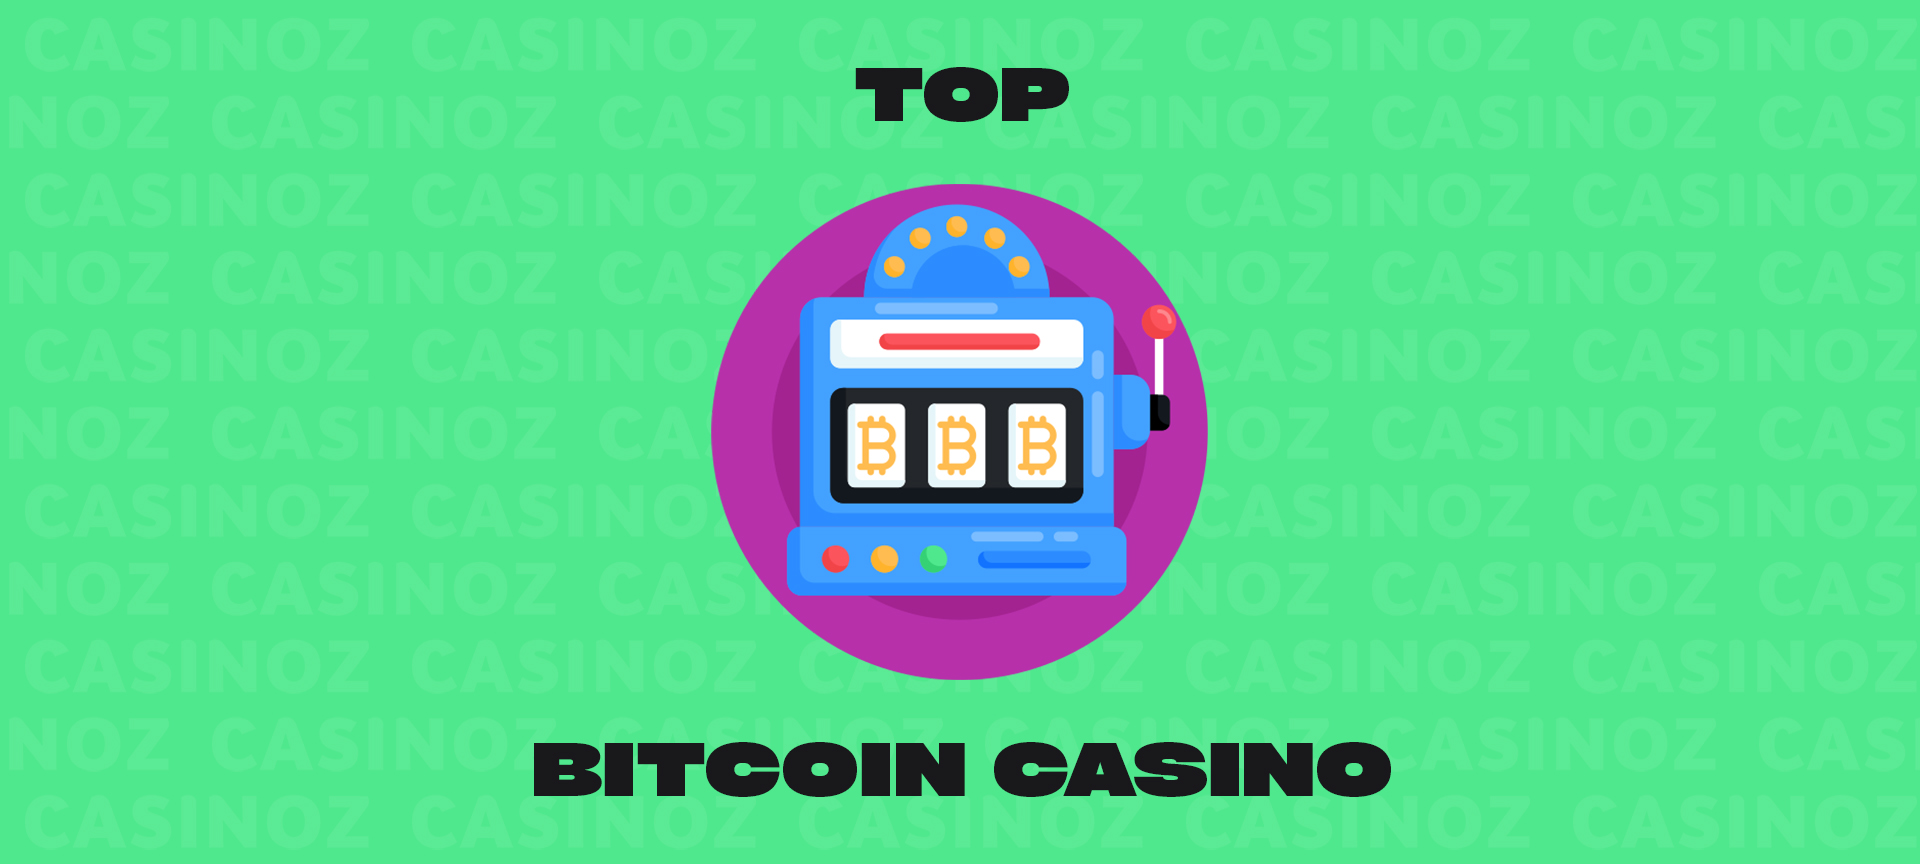 3 Short Stories You Didn't Know About casino with bitcoin